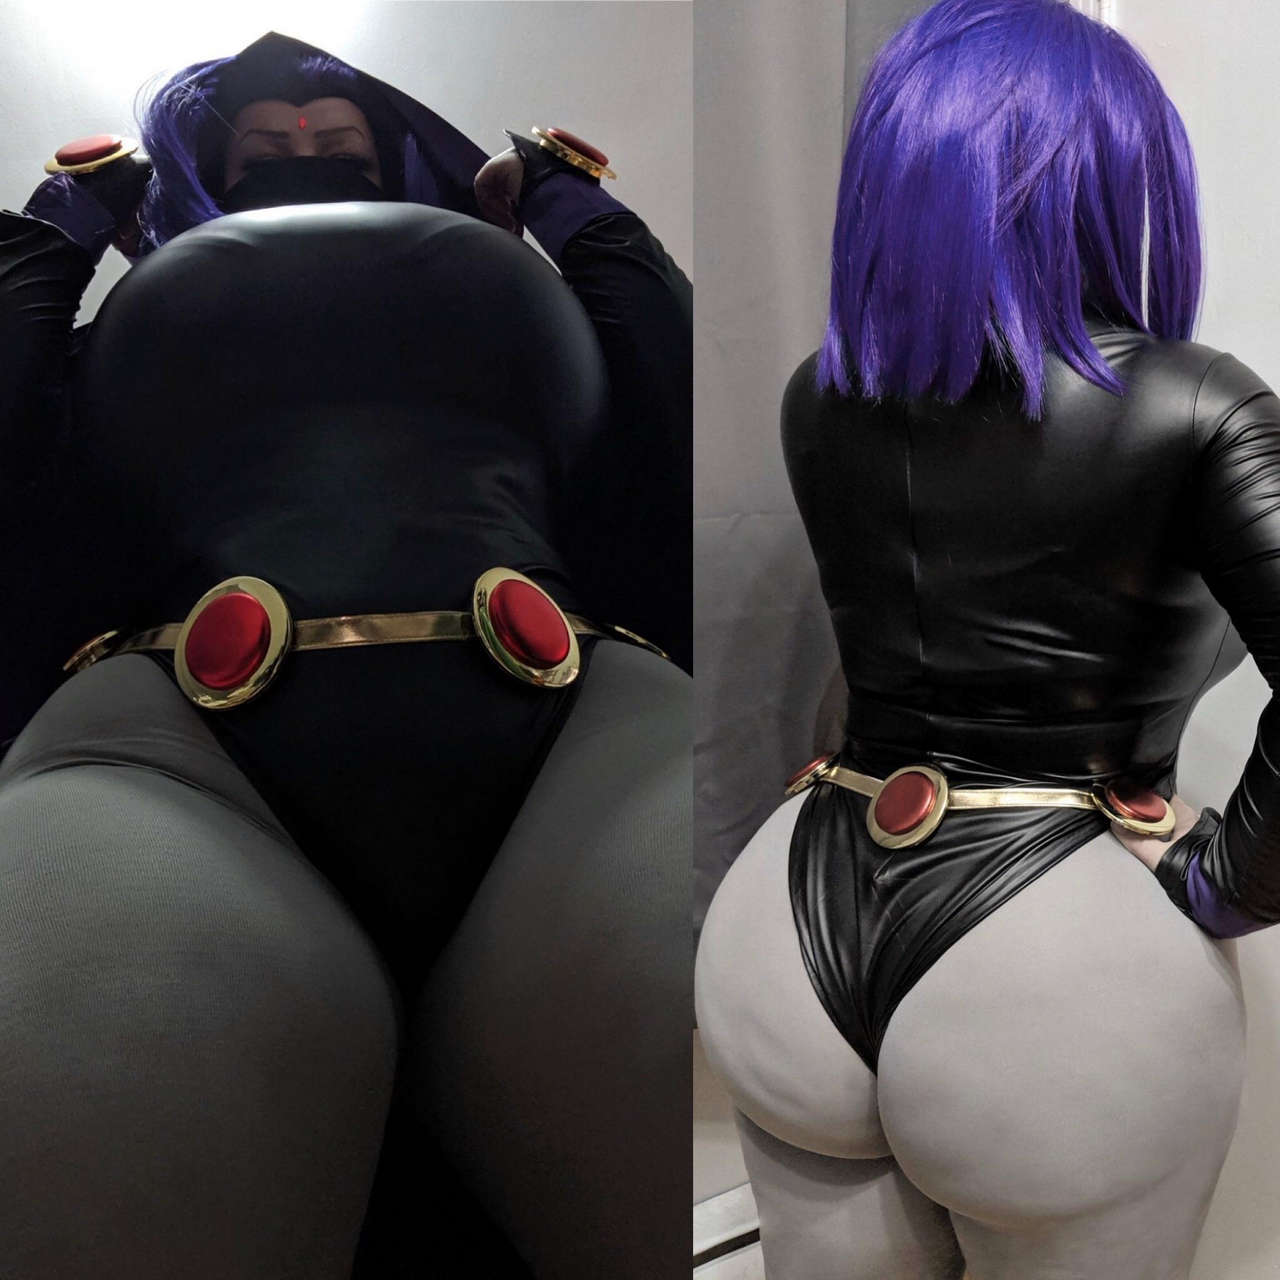 Raven From Teen Titans Cospla